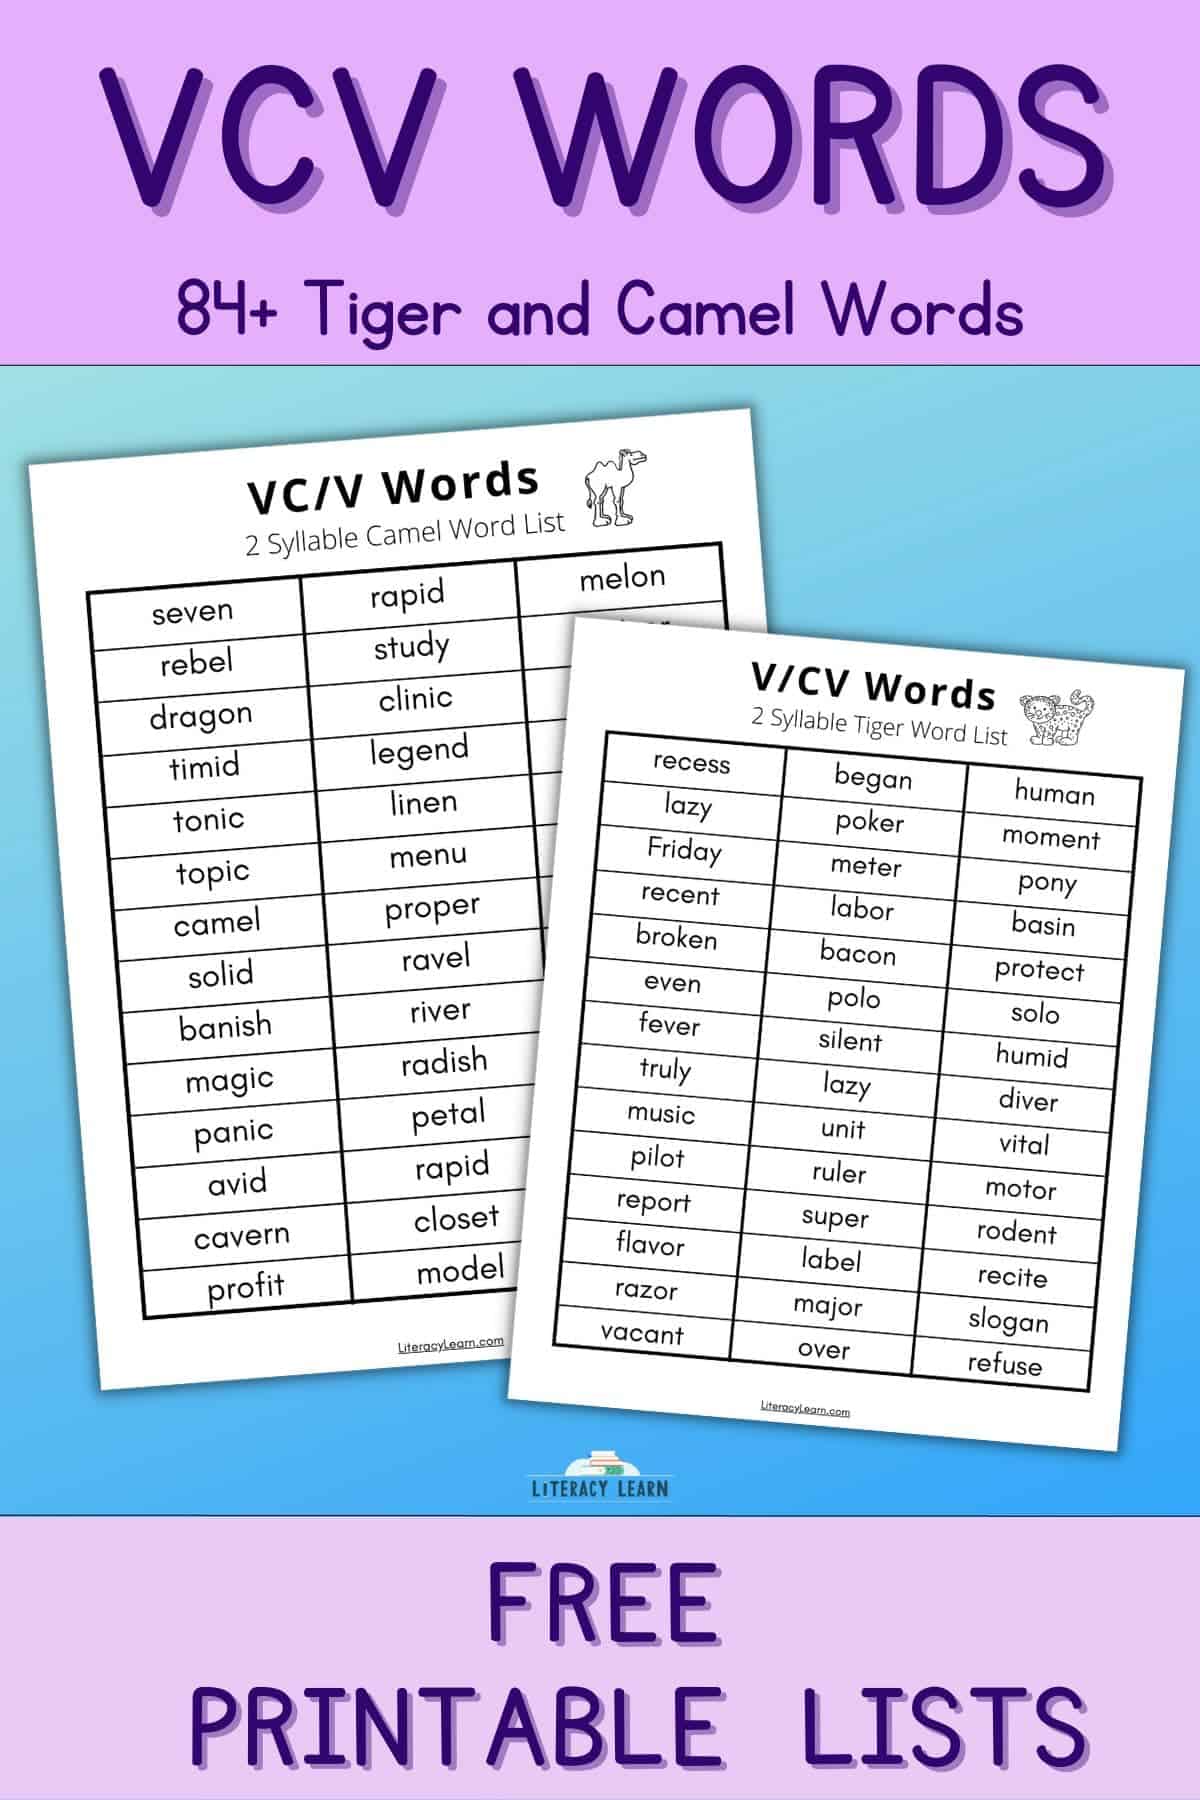 Two VCV word lists, organized by Tiger and Camel words, displayed on blue background.